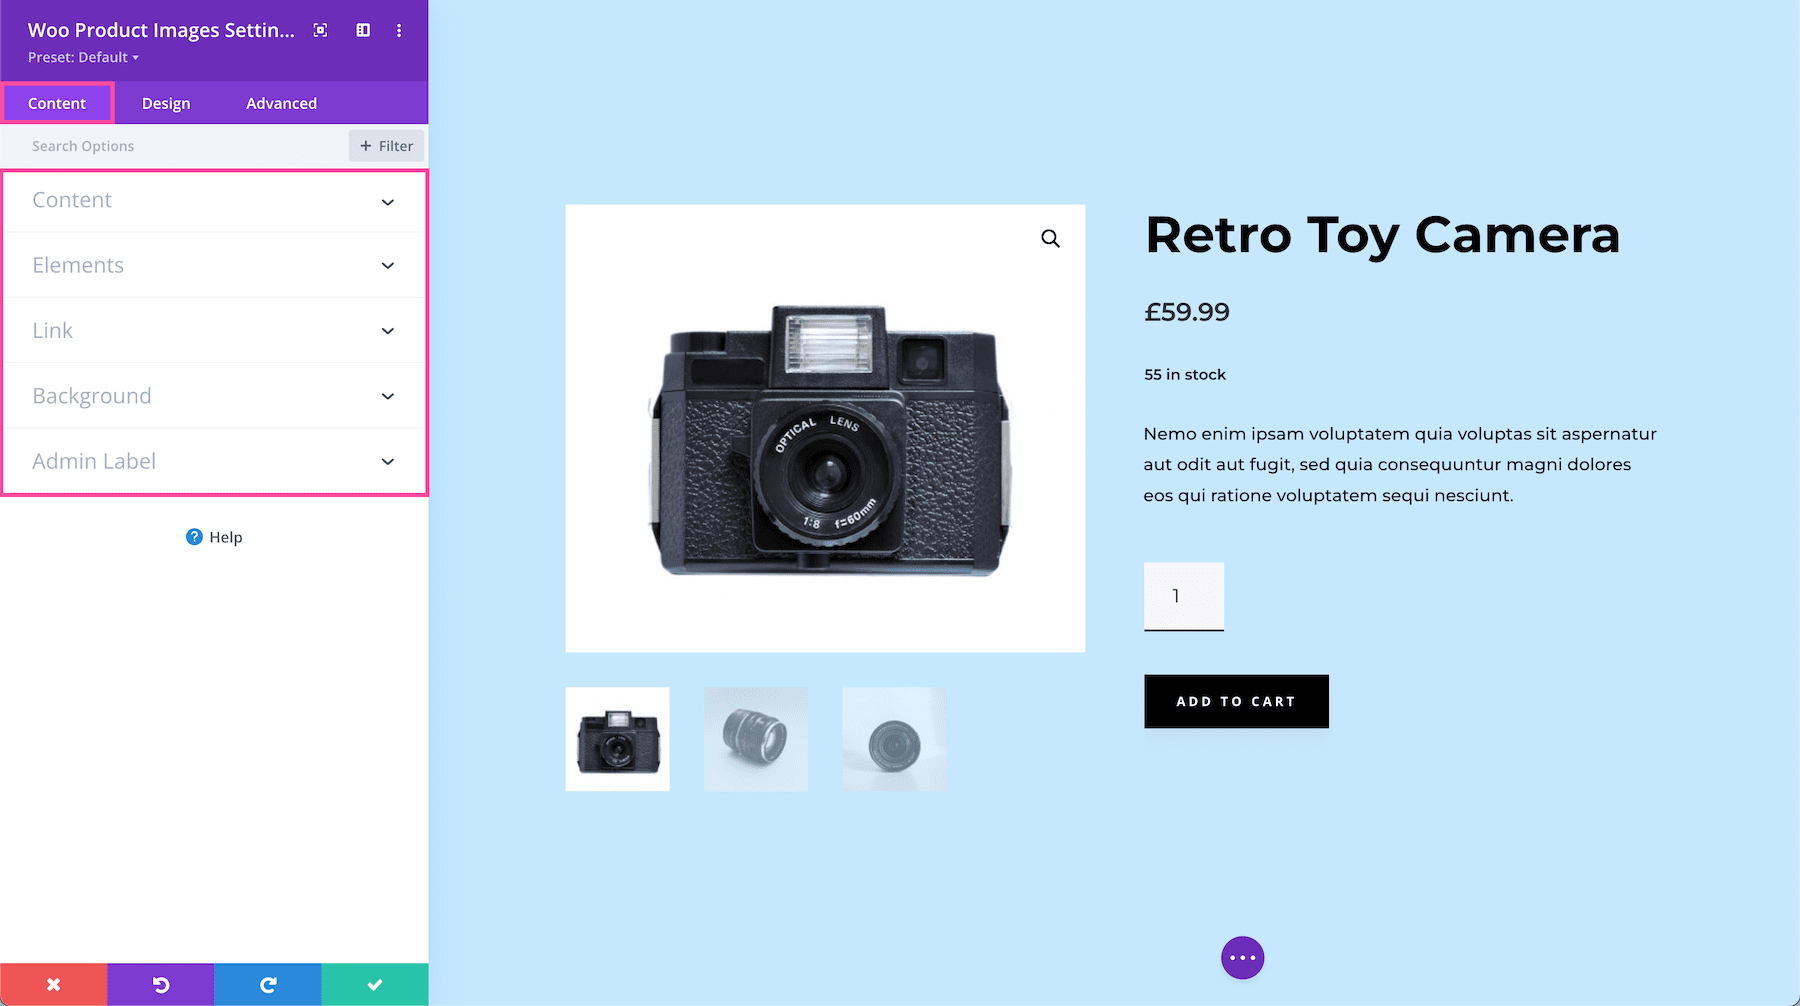 Divi Woo Product Images Module Content Settings